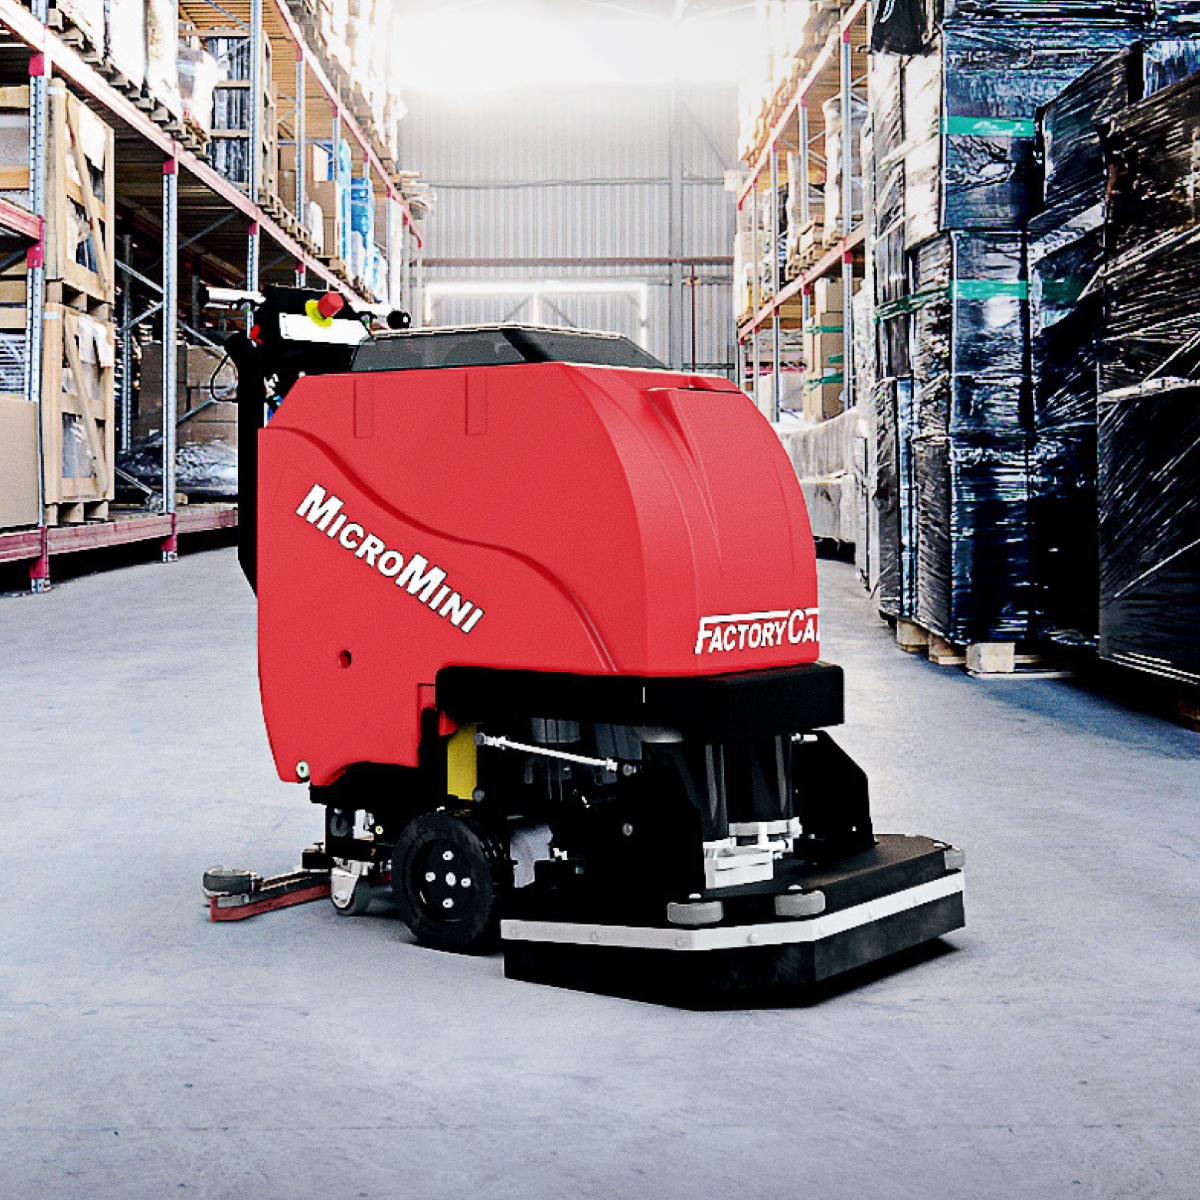 The MICROMINI Walk Behind Floor Scrubber comes equipped with a Traction drive which includes a powerful all-gear transaxle for climbing ramps and max operator ease or a Pad Assist version.